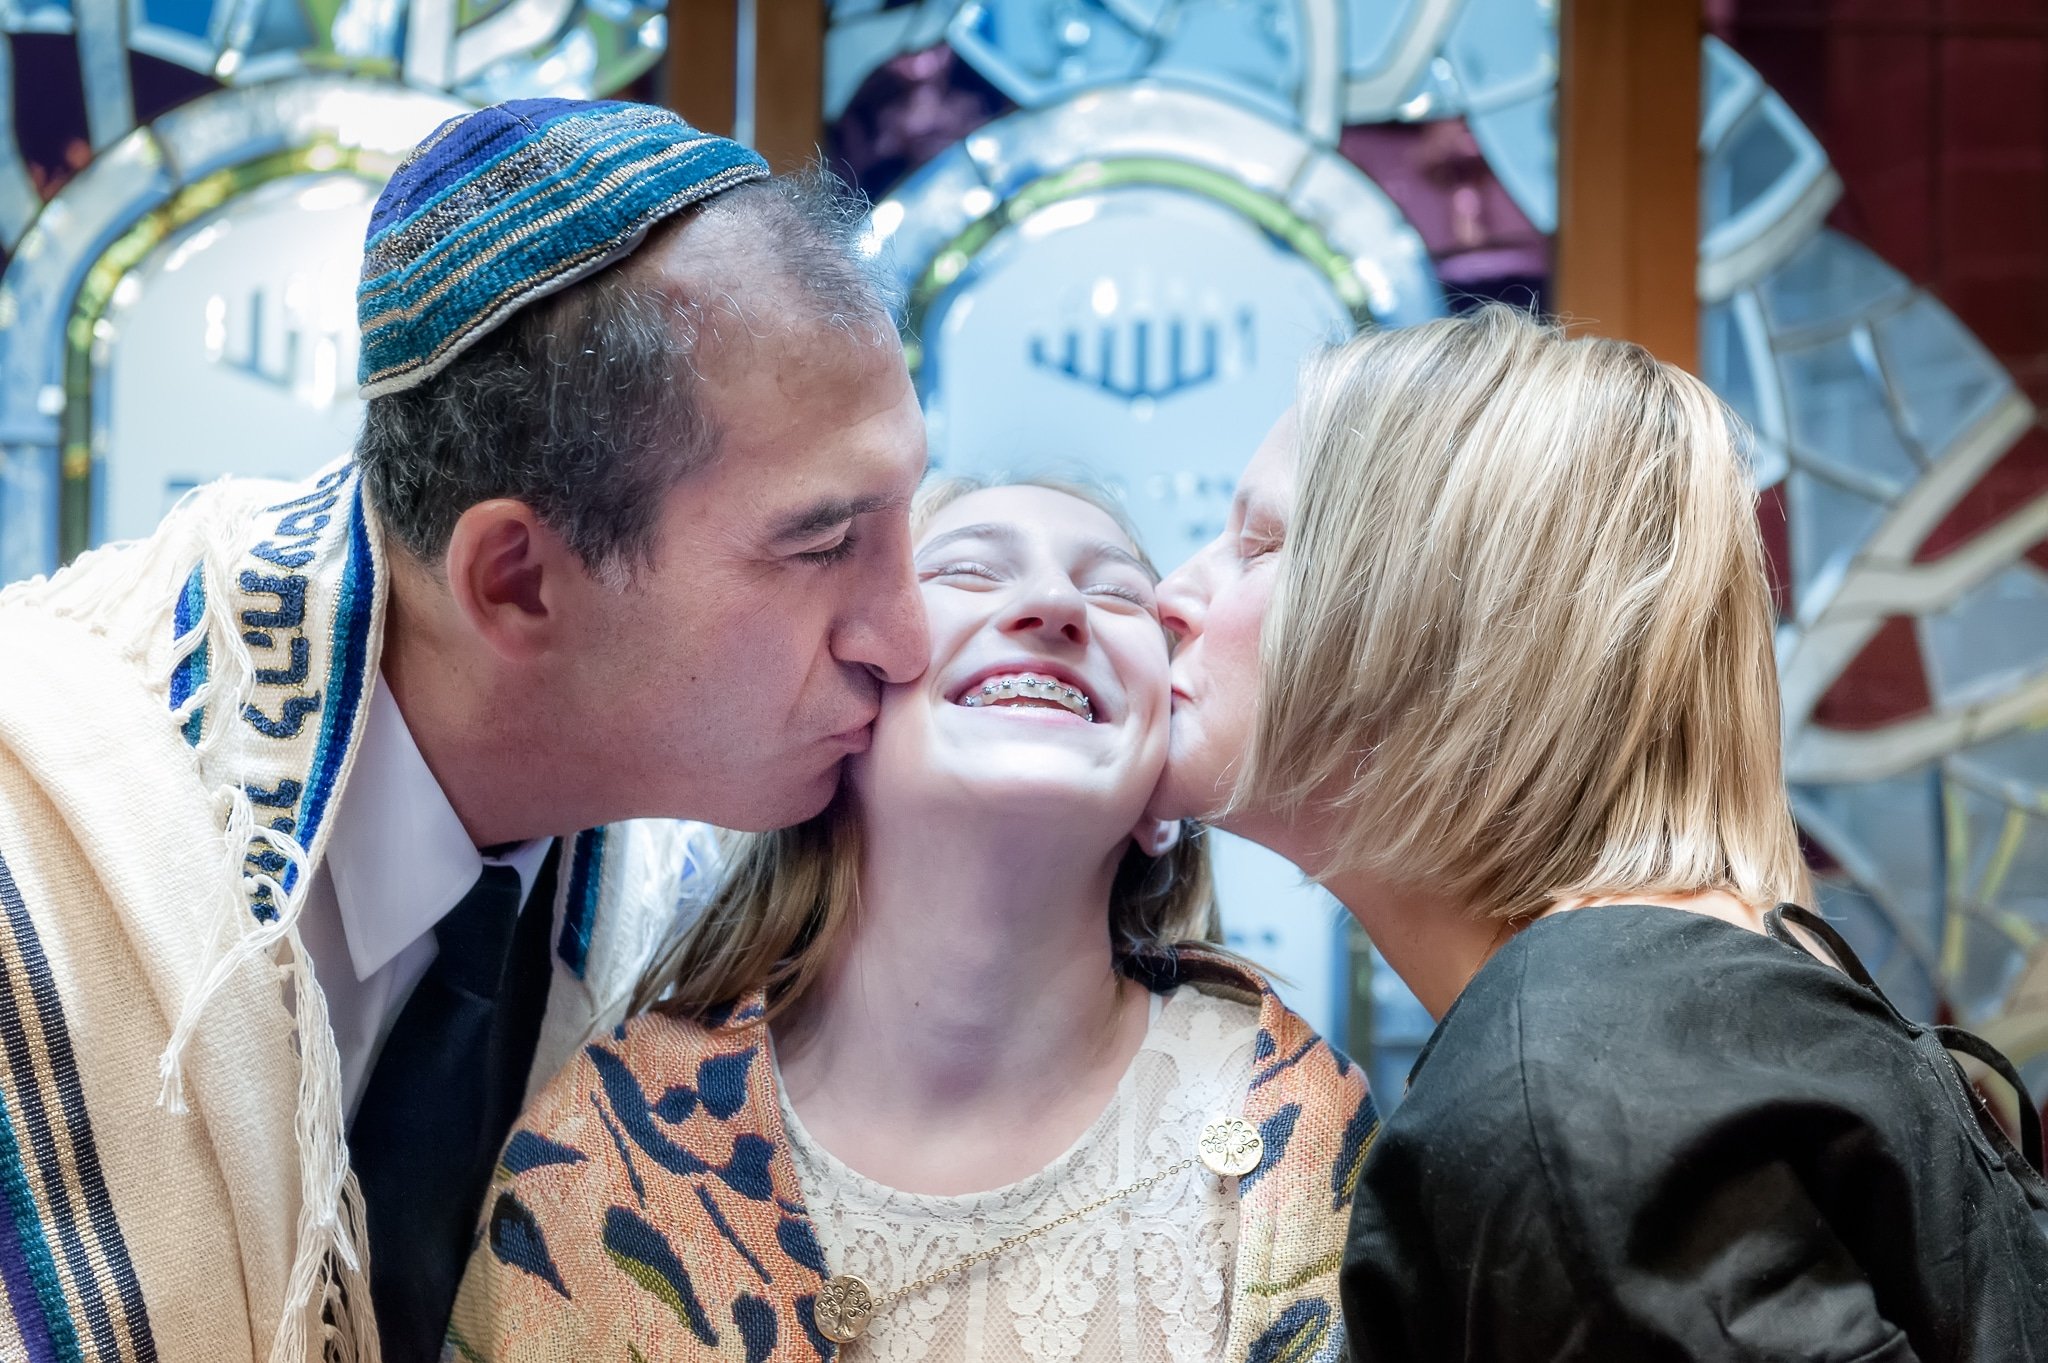 A mother and father kiss the cheeks of their daughter following her mitzvah practice.